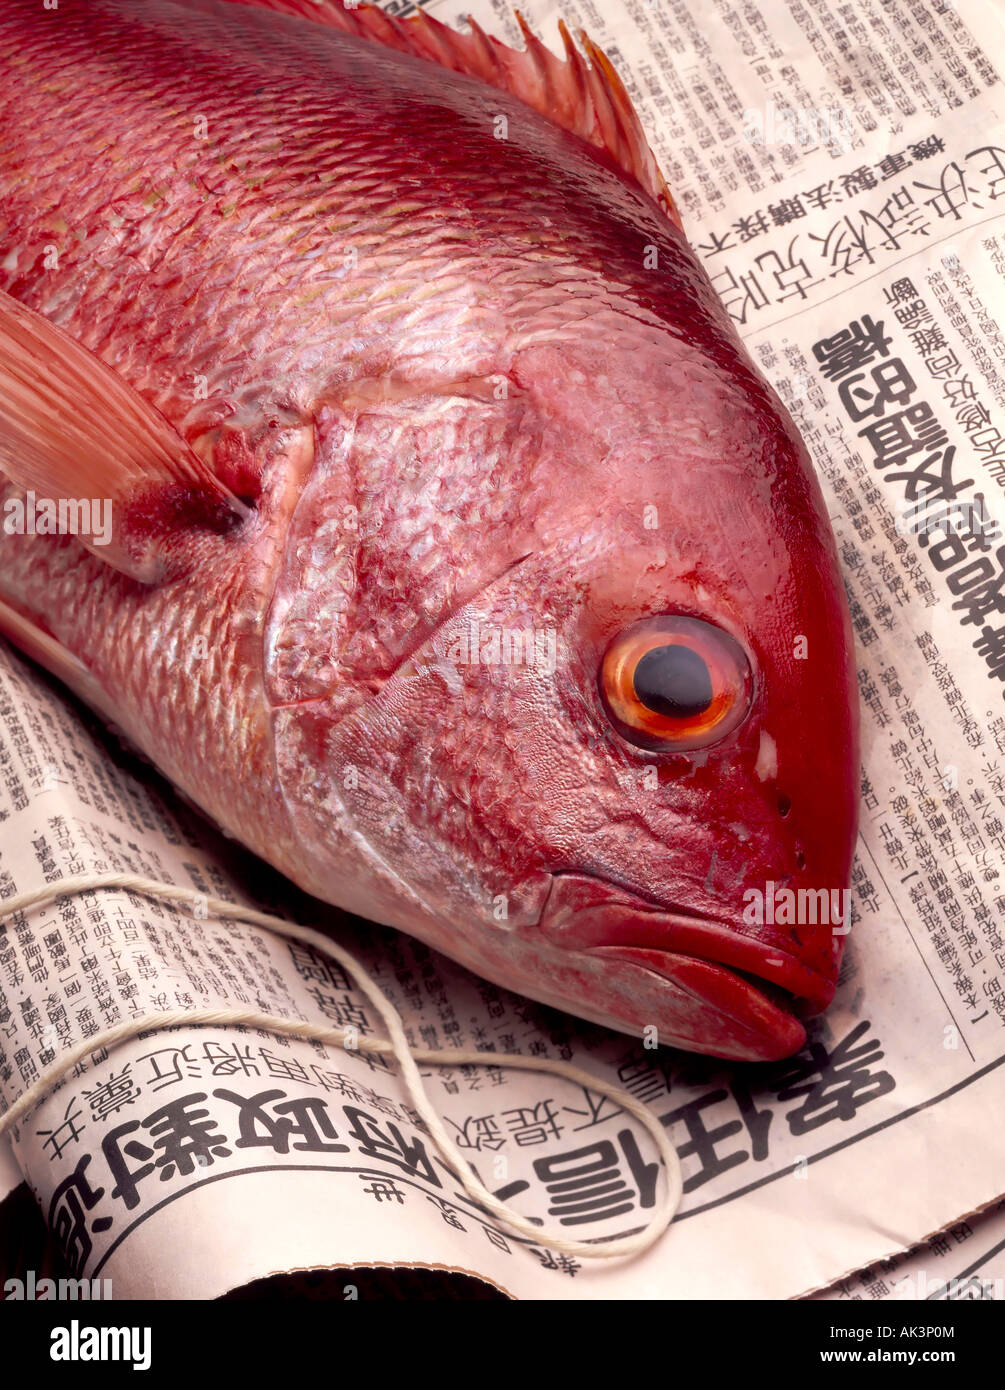 red fish in asian news paper Stock Photo